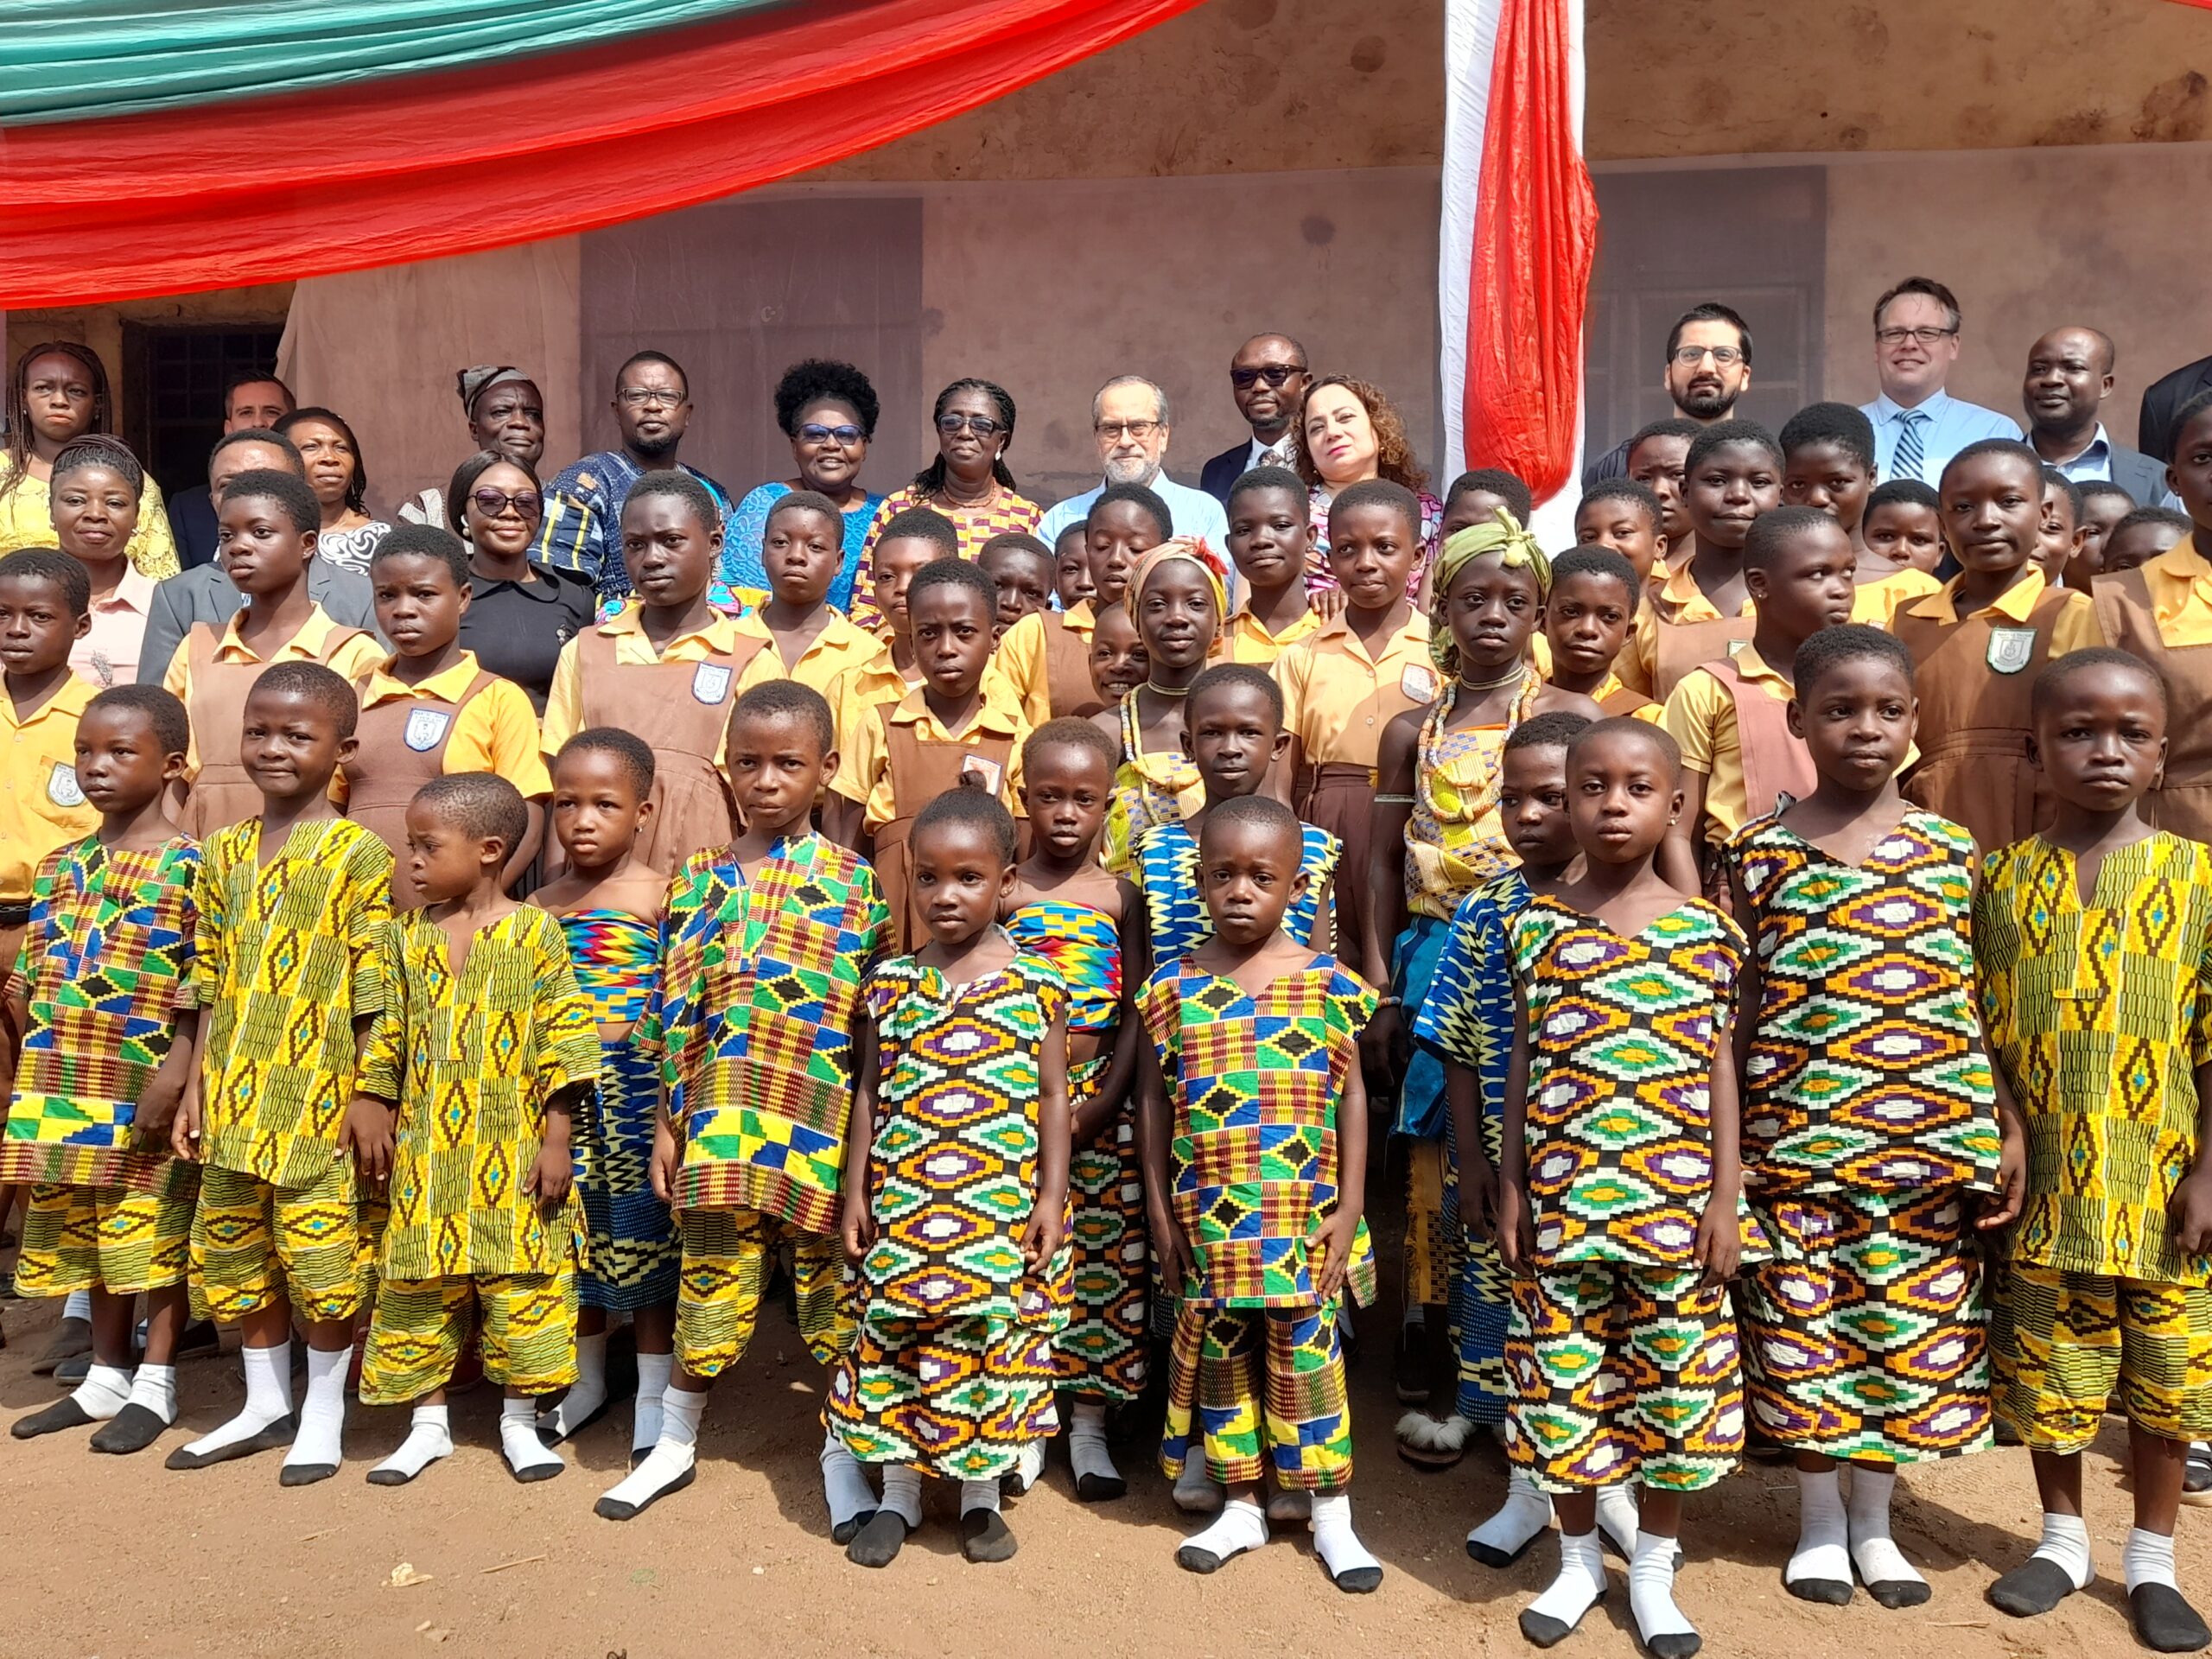 World Bank funded education project improving learning outcomes in Ghana schools